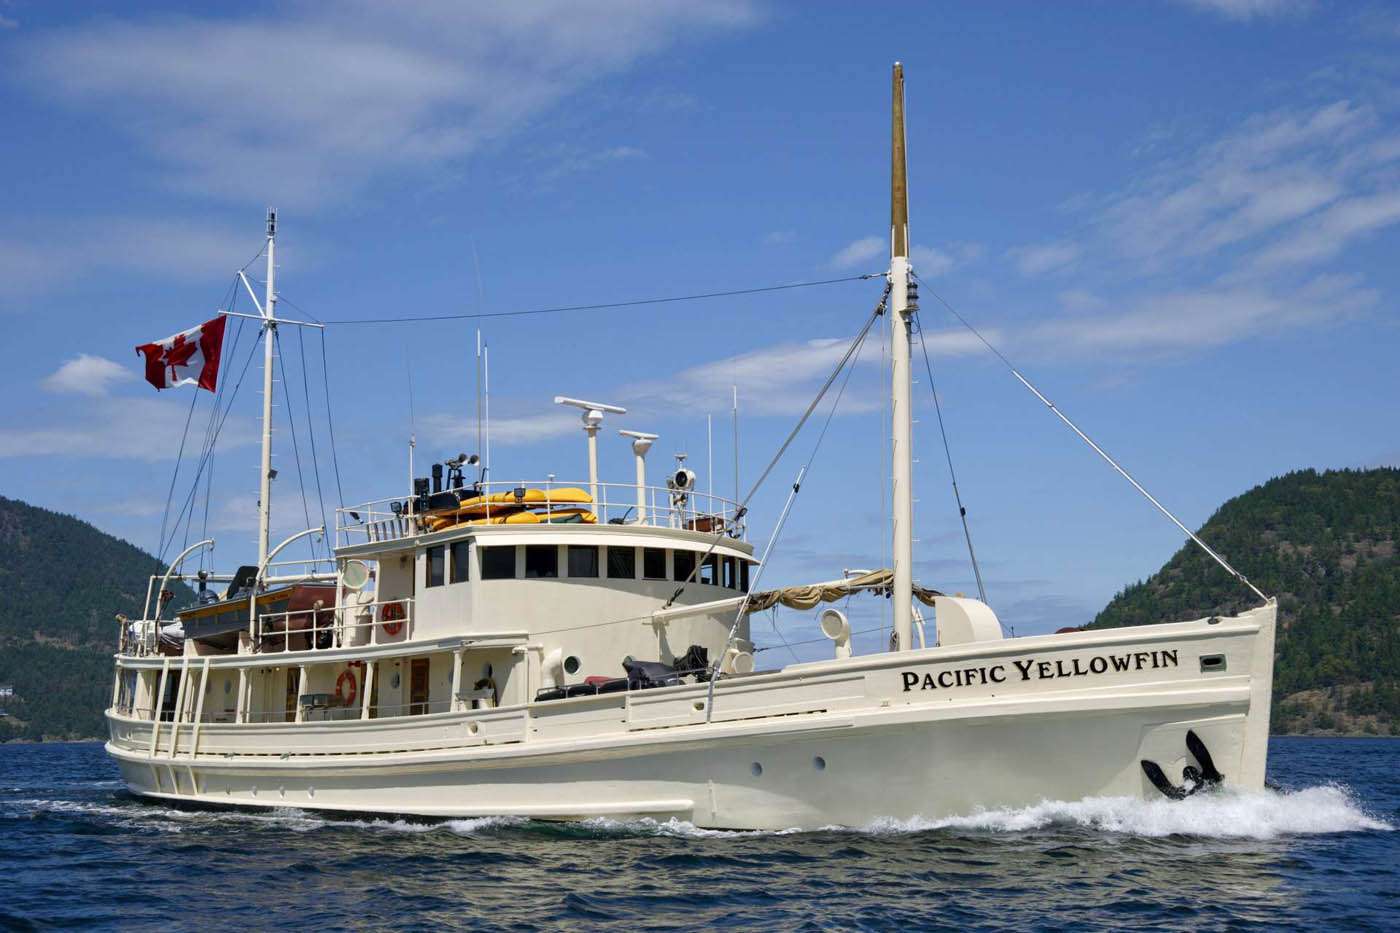 pacific yellowfin - Yacht Charter Nanaimo & Boat hire in Pacific North West & Canada 1